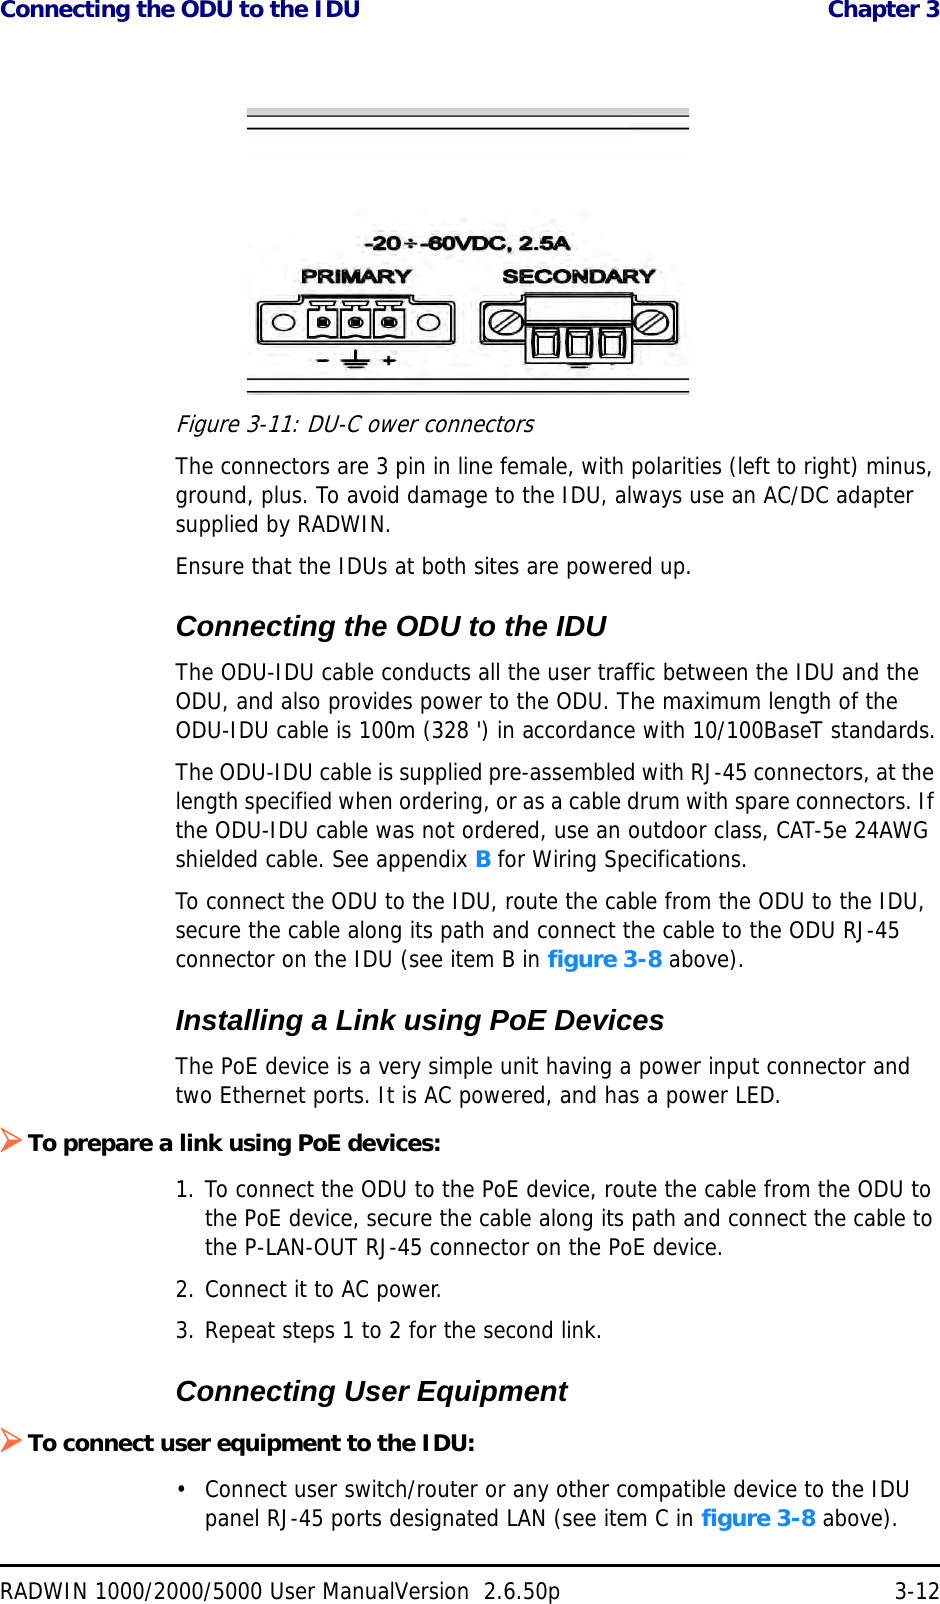 Connecting the ODU to the IDU  Chapter 3RADWIN 1000/2000/5000 User ManualVersion  2.6.50p 3-12Figure 3-11: DU-C ower connectorsThe connectors are 3 pin in line female, with polarities (left to right) minus, ground, plus. To avoid damage to the IDU, always use an AC/DC adapter supplied by RADWIN.Ensure that the IDUs at both sites are powered up.Connecting the ODU to the IDUThe ODU-IDU cable conducts all the user traffic between the IDU and the ODU, and also provides power to the ODU. The maximum length of the ODU-IDU cable is 100m (328 &apos;) in accordance with 10/100BaseT standards.The ODU-IDU cable is supplied pre-assembled with RJ-45 connectors, at the length specified when ordering, or as a cable drum with spare connectors. If the ODU-IDU cable was not ordered, use an outdoor class, CAT-5e 24AWG shielded cable. See appendix B for Wiring Specifications.To connect the ODU to the IDU, route the cable from the ODU to the IDU, secure the cable along its path and connect the cable to the ODU RJ-45 connector on the IDU (see item B in figure 3-8 above).Installing a Link using PoE DevicesThe PoE device is a very simple unit having a power input connector and two Ethernet ports. It is AC powered, and has a power LED.To prepare a link using PoE devices:1. To connect the ODU to the PoE device, route the cable from the ODU to the PoE device, secure the cable along its path and connect the cable to the P-LAN-OUT RJ-45 connector on the PoE device.2. Connect it to AC power.3. Repeat steps 1 to 2 for the second link.Connecting User EquipmentTo connect user equipment to the IDU:• Connect user switch/router or any other compatible device to the IDU panel RJ-45 ports designated LAN (see item C in figure 3-8 above).